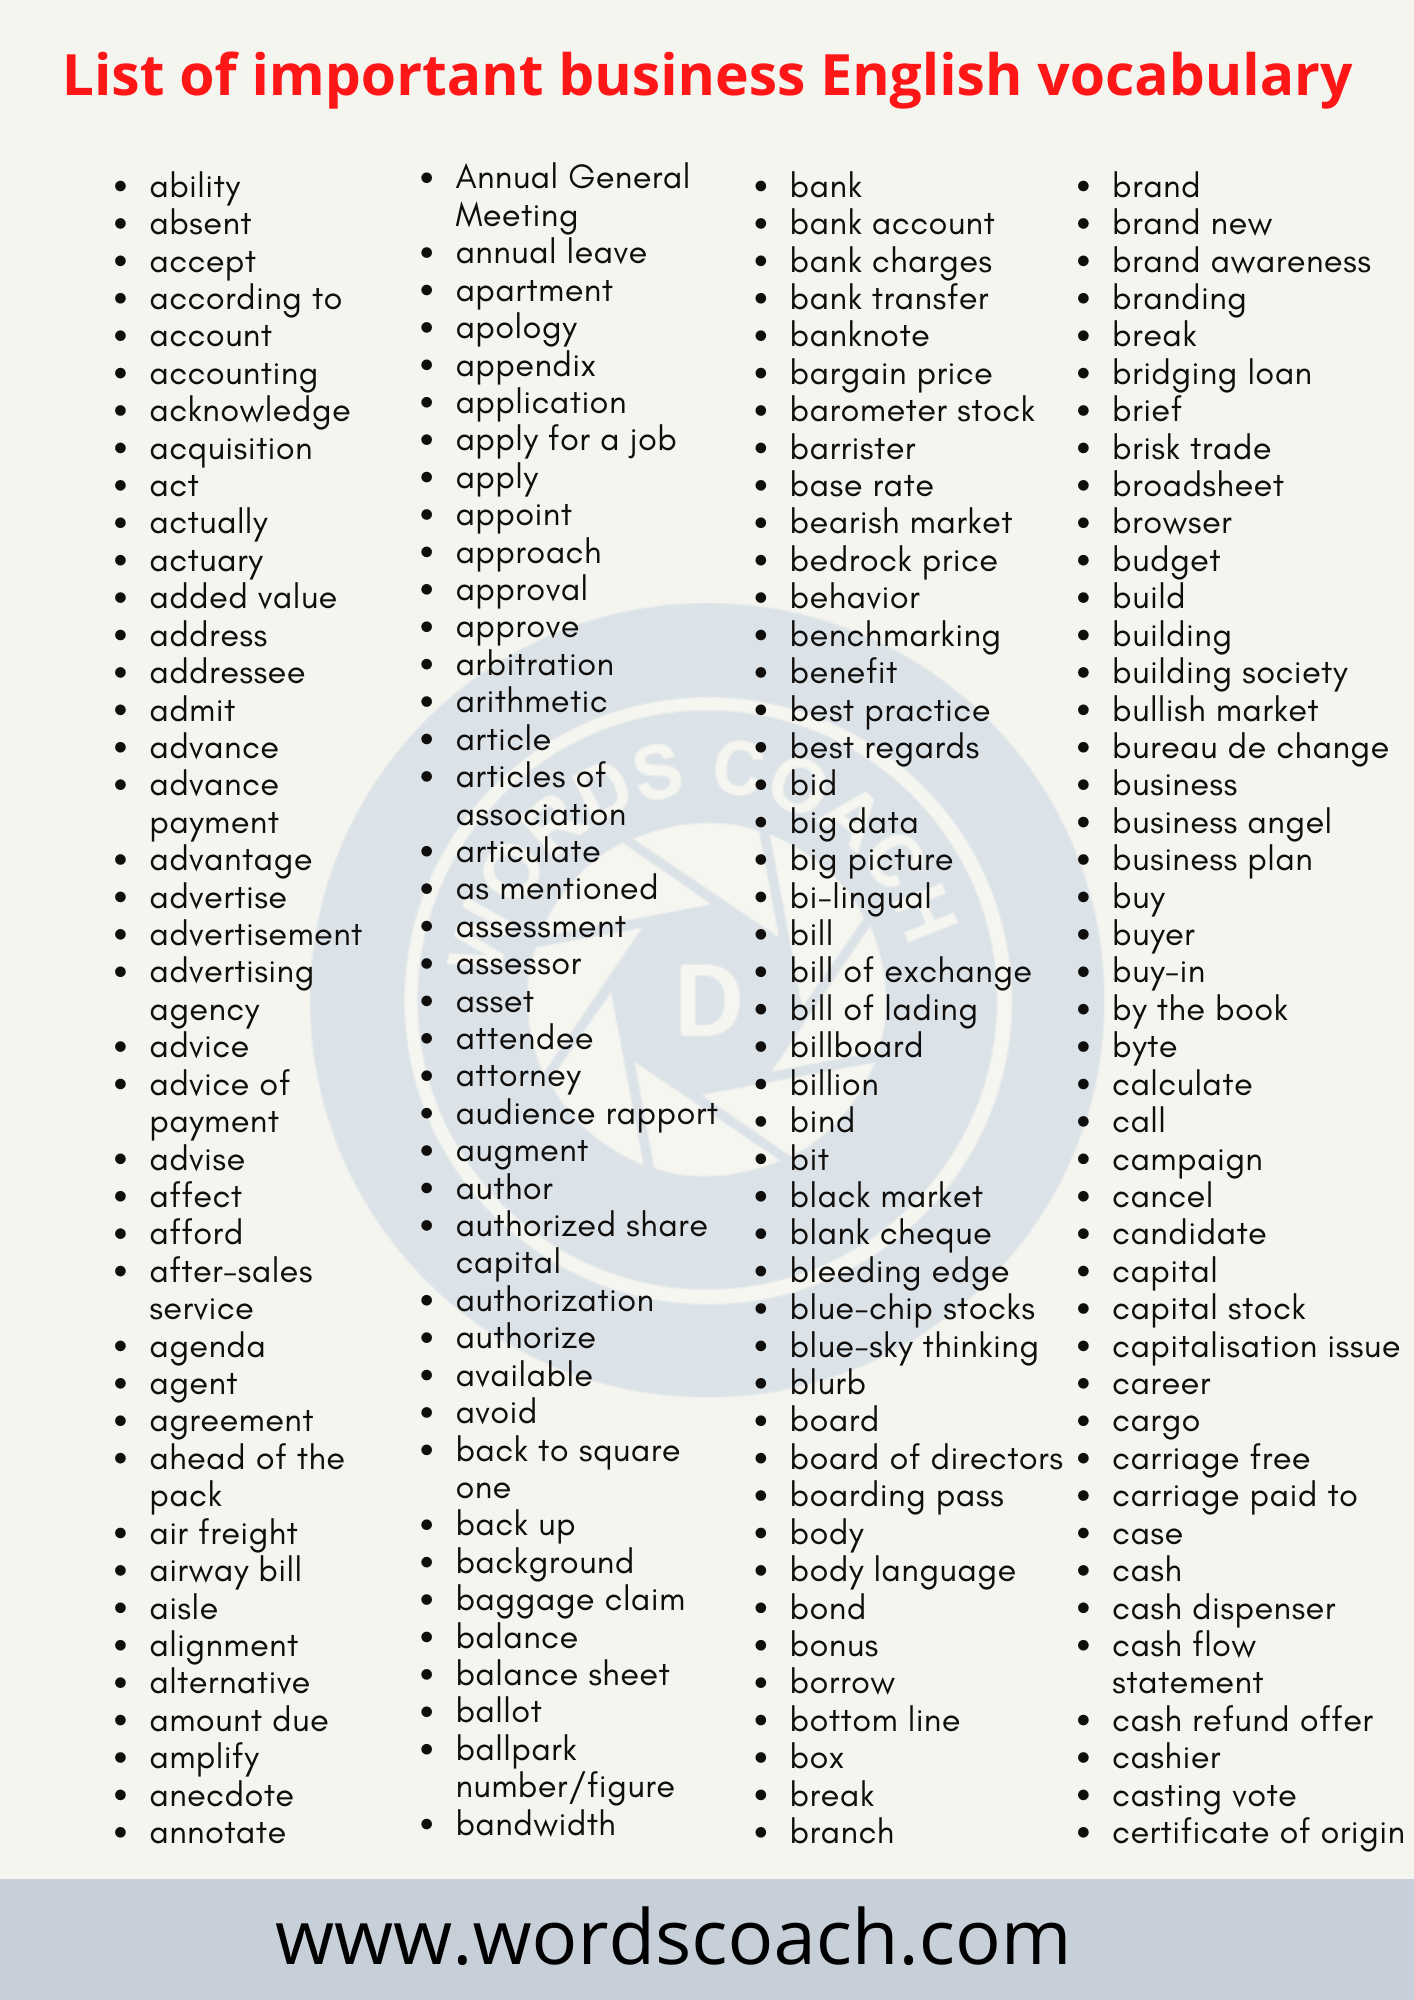 List of important business English vocabulary